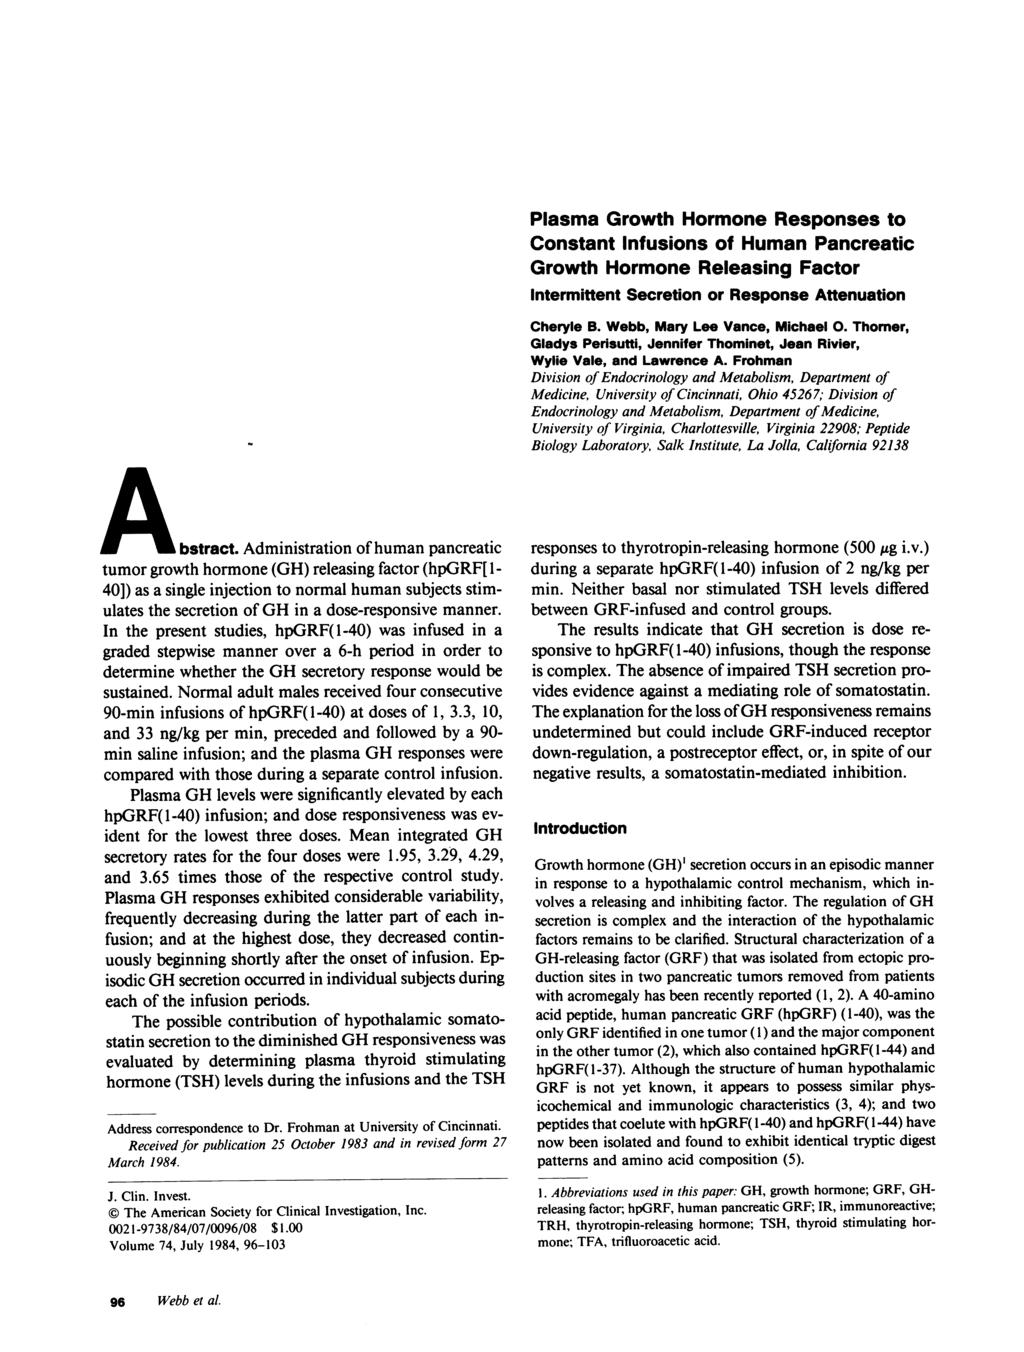 Plasma Growth Hormone Responses to Constant Infusions of Human Pancreatic Growth Hormone Releasing Factor Intermittent Secretion or Response Attenuation Cheryle B. Webb, Mary Lee Vance, Michael 0.